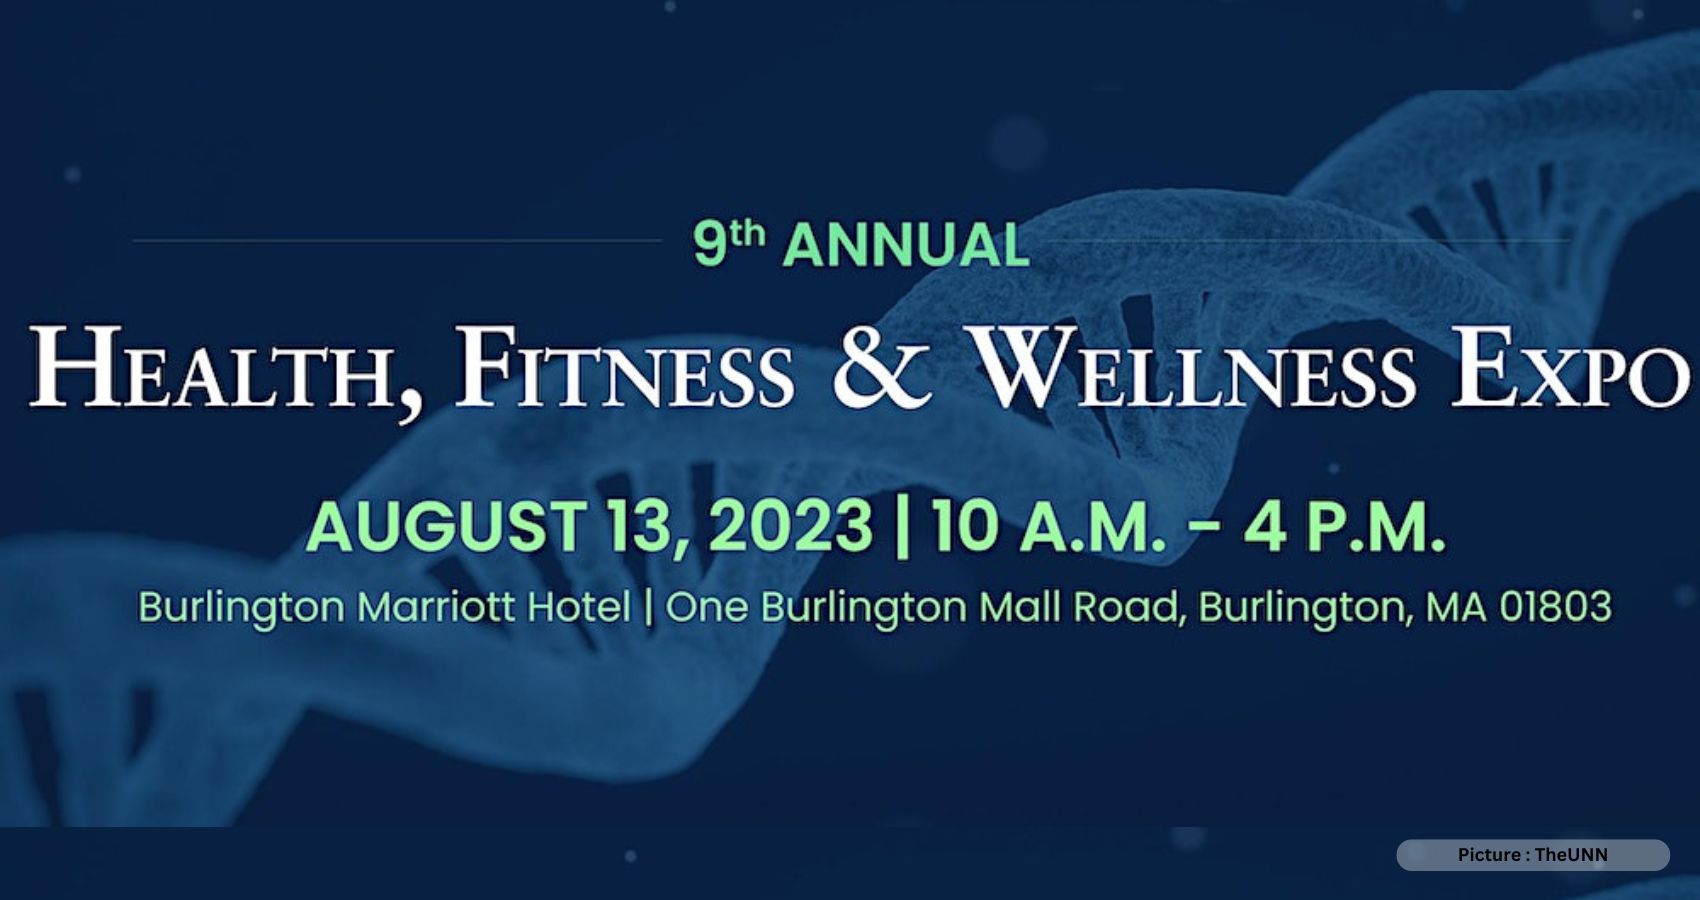 New England’s 9th Annual Health, Fitness & Wellness Expo Planned